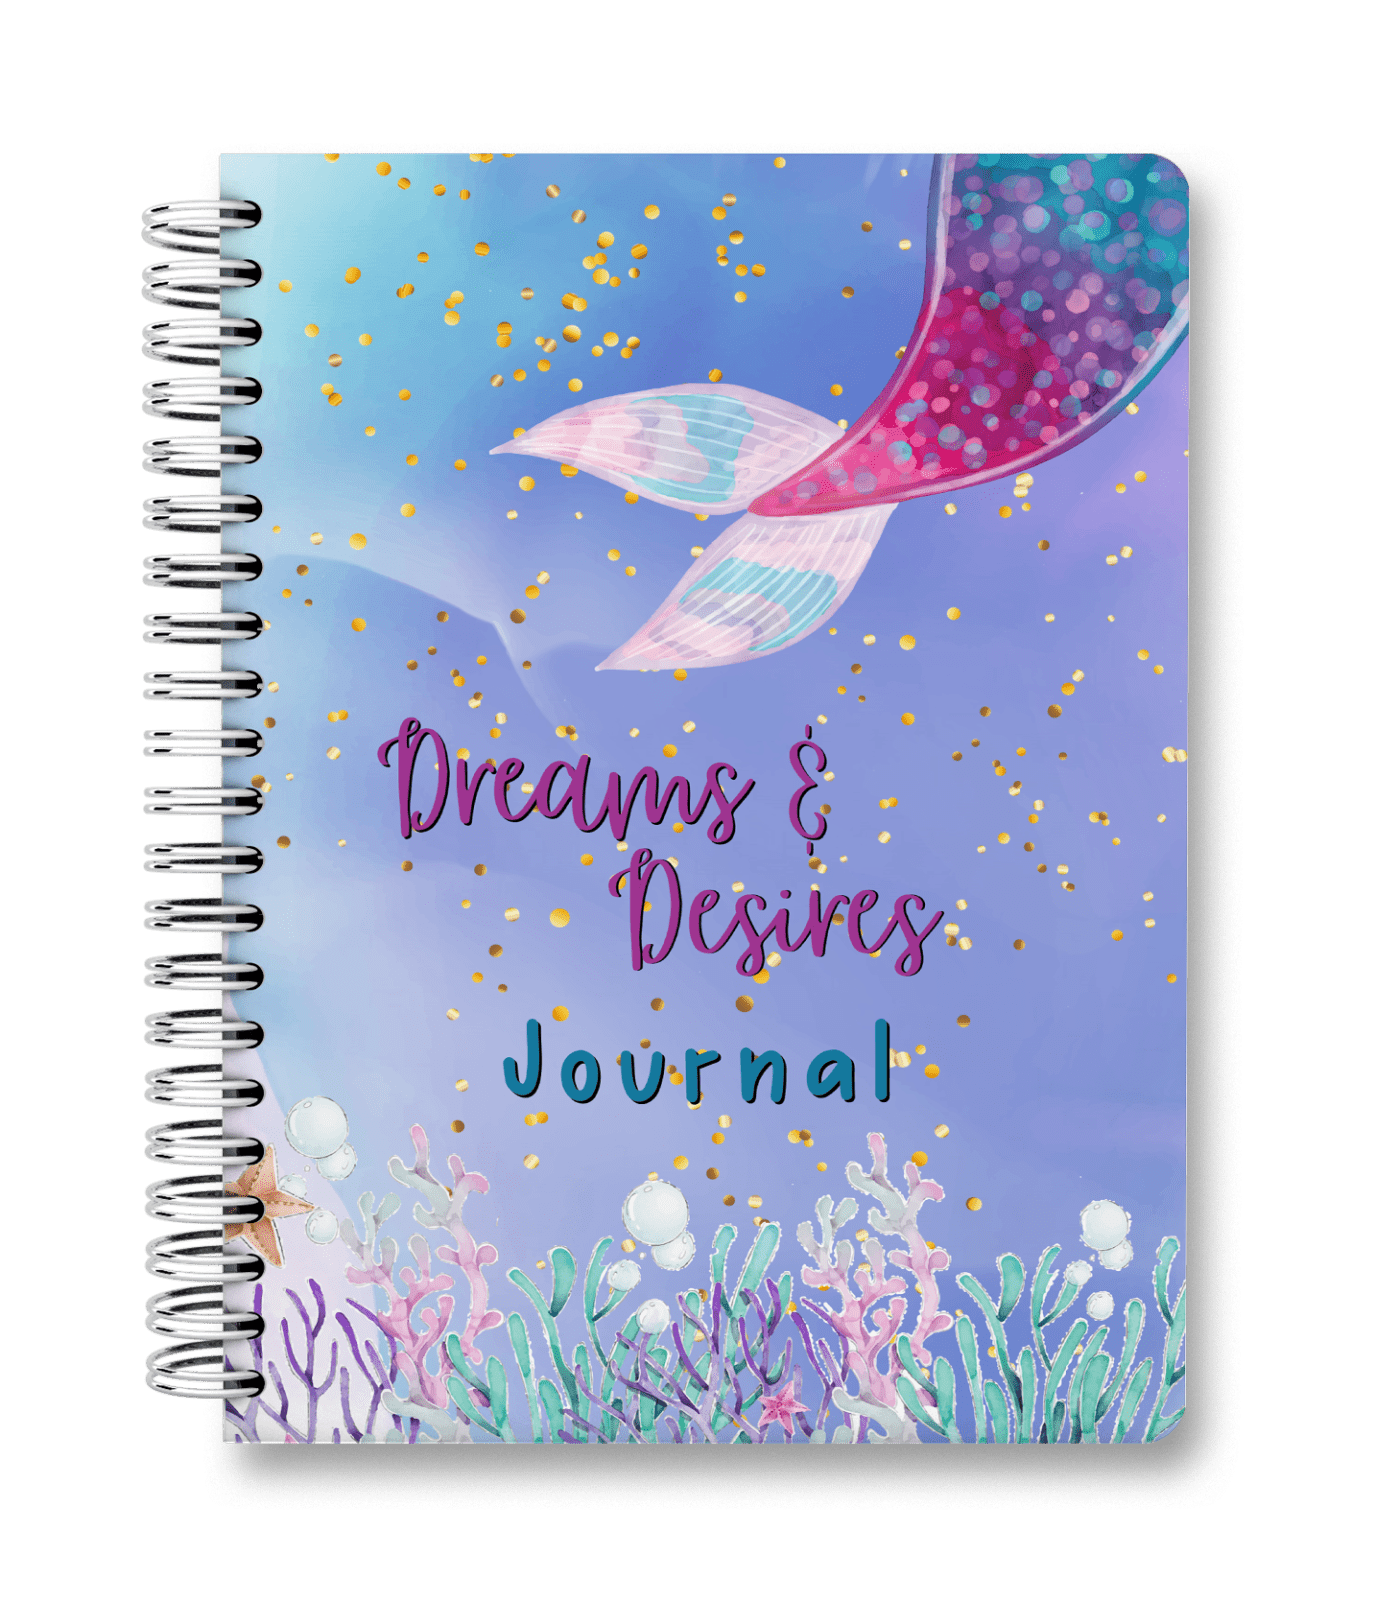 Dreams and Desires (Mermaid Edition)  - Spiral Hardcover Journal